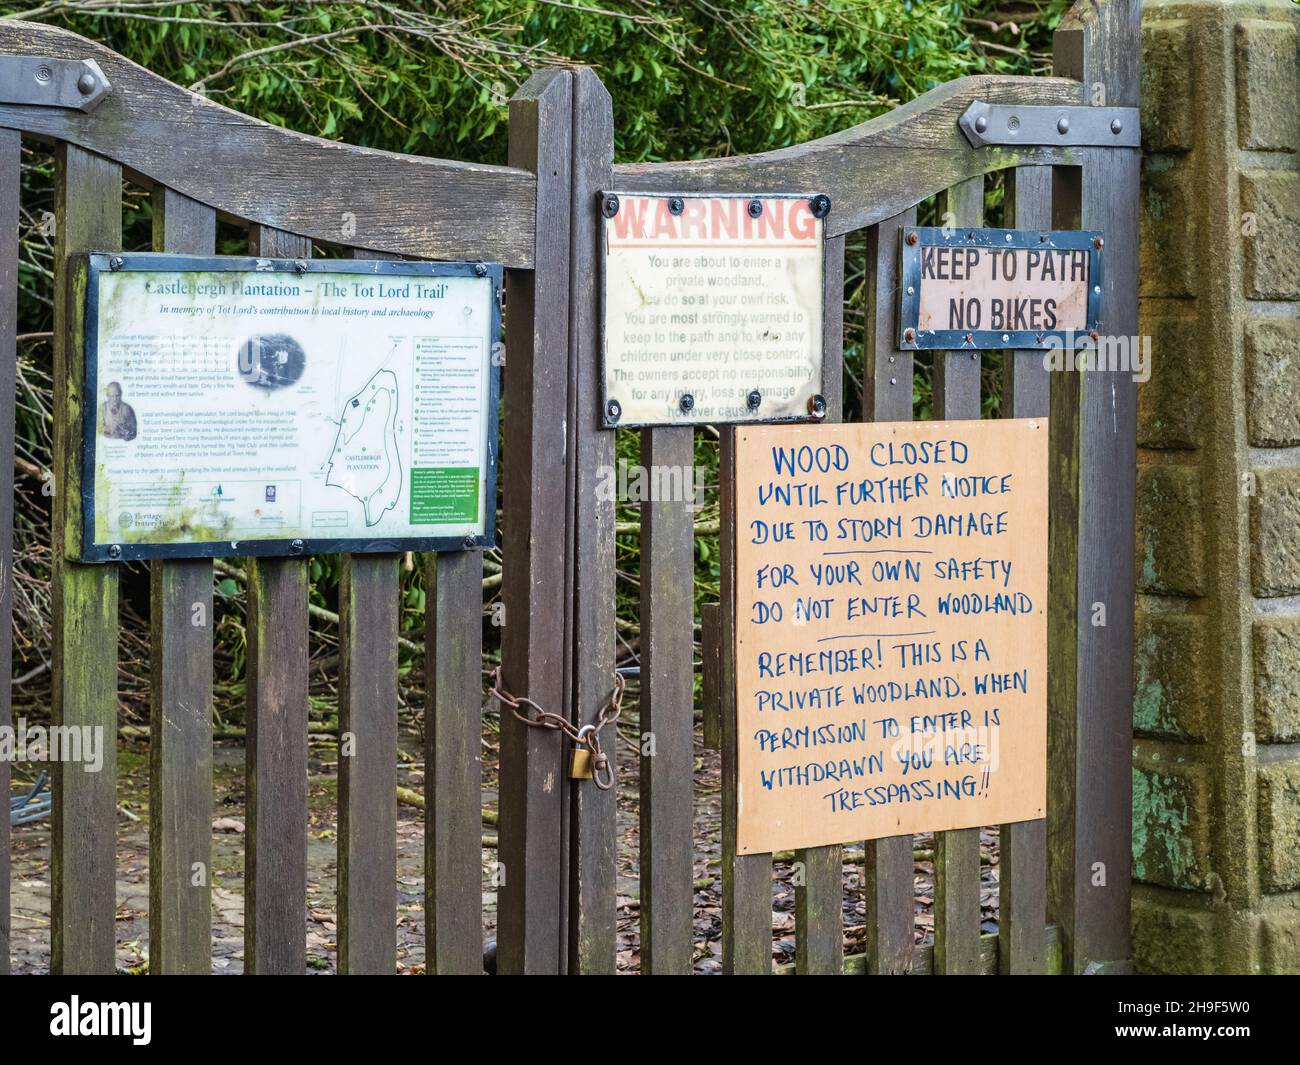 05.12.2021 Langcliffe, Settle, North Yokshire, UK. Signs on a gate saying wood closed, keep to path no bikes. On the high road to Settle Stock Photo